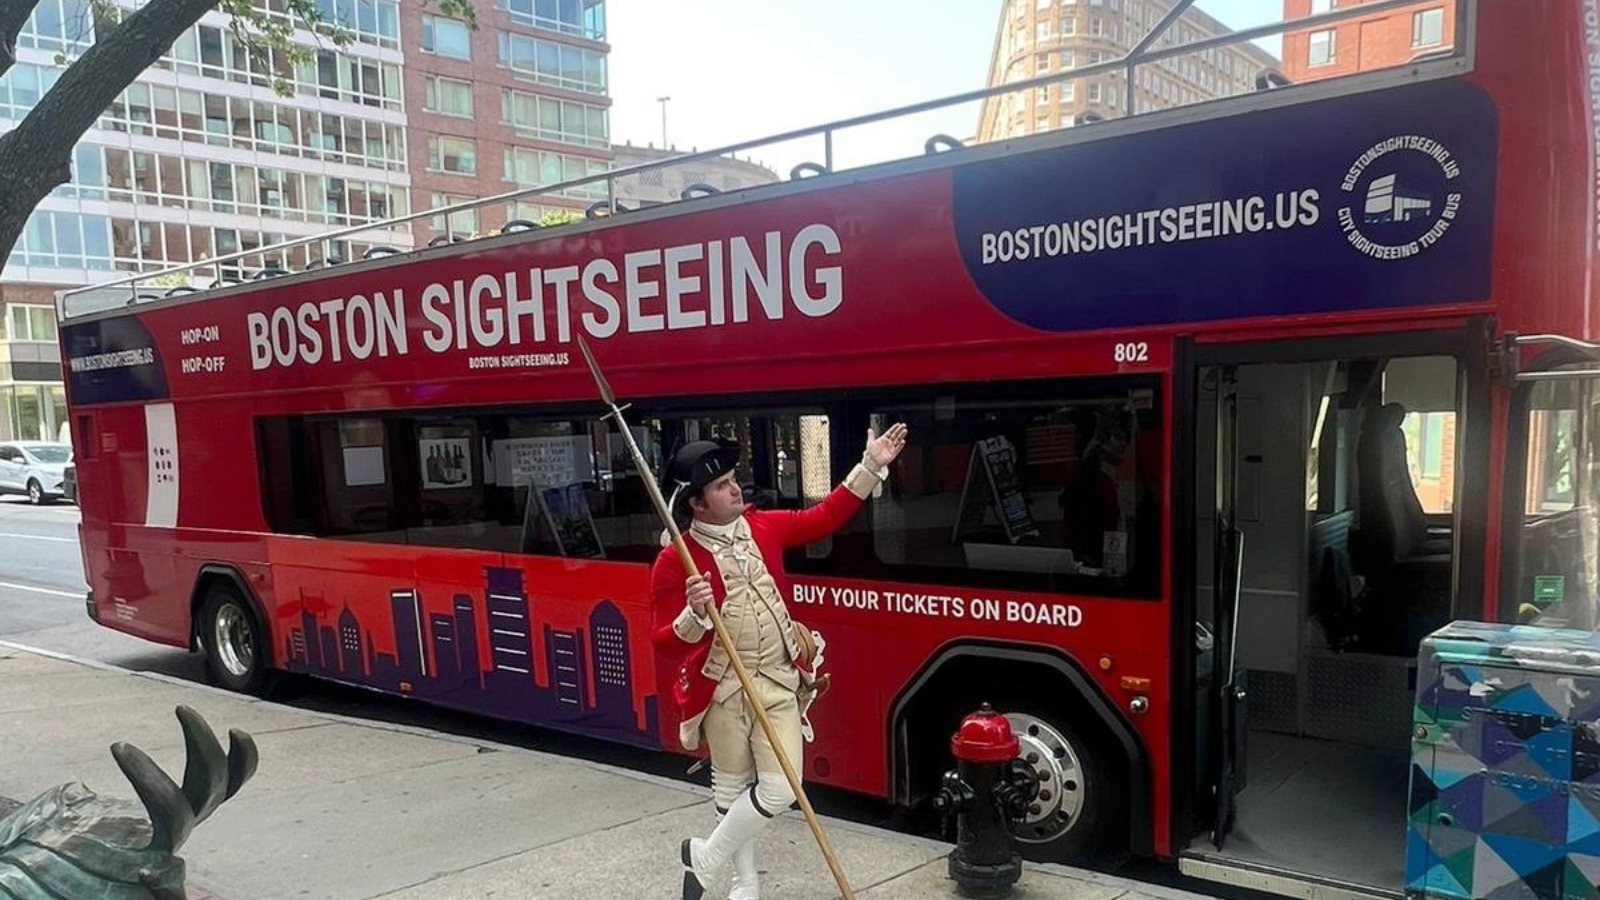 What are the top three must-see landmarks or attractions for tourists visiting Boston?